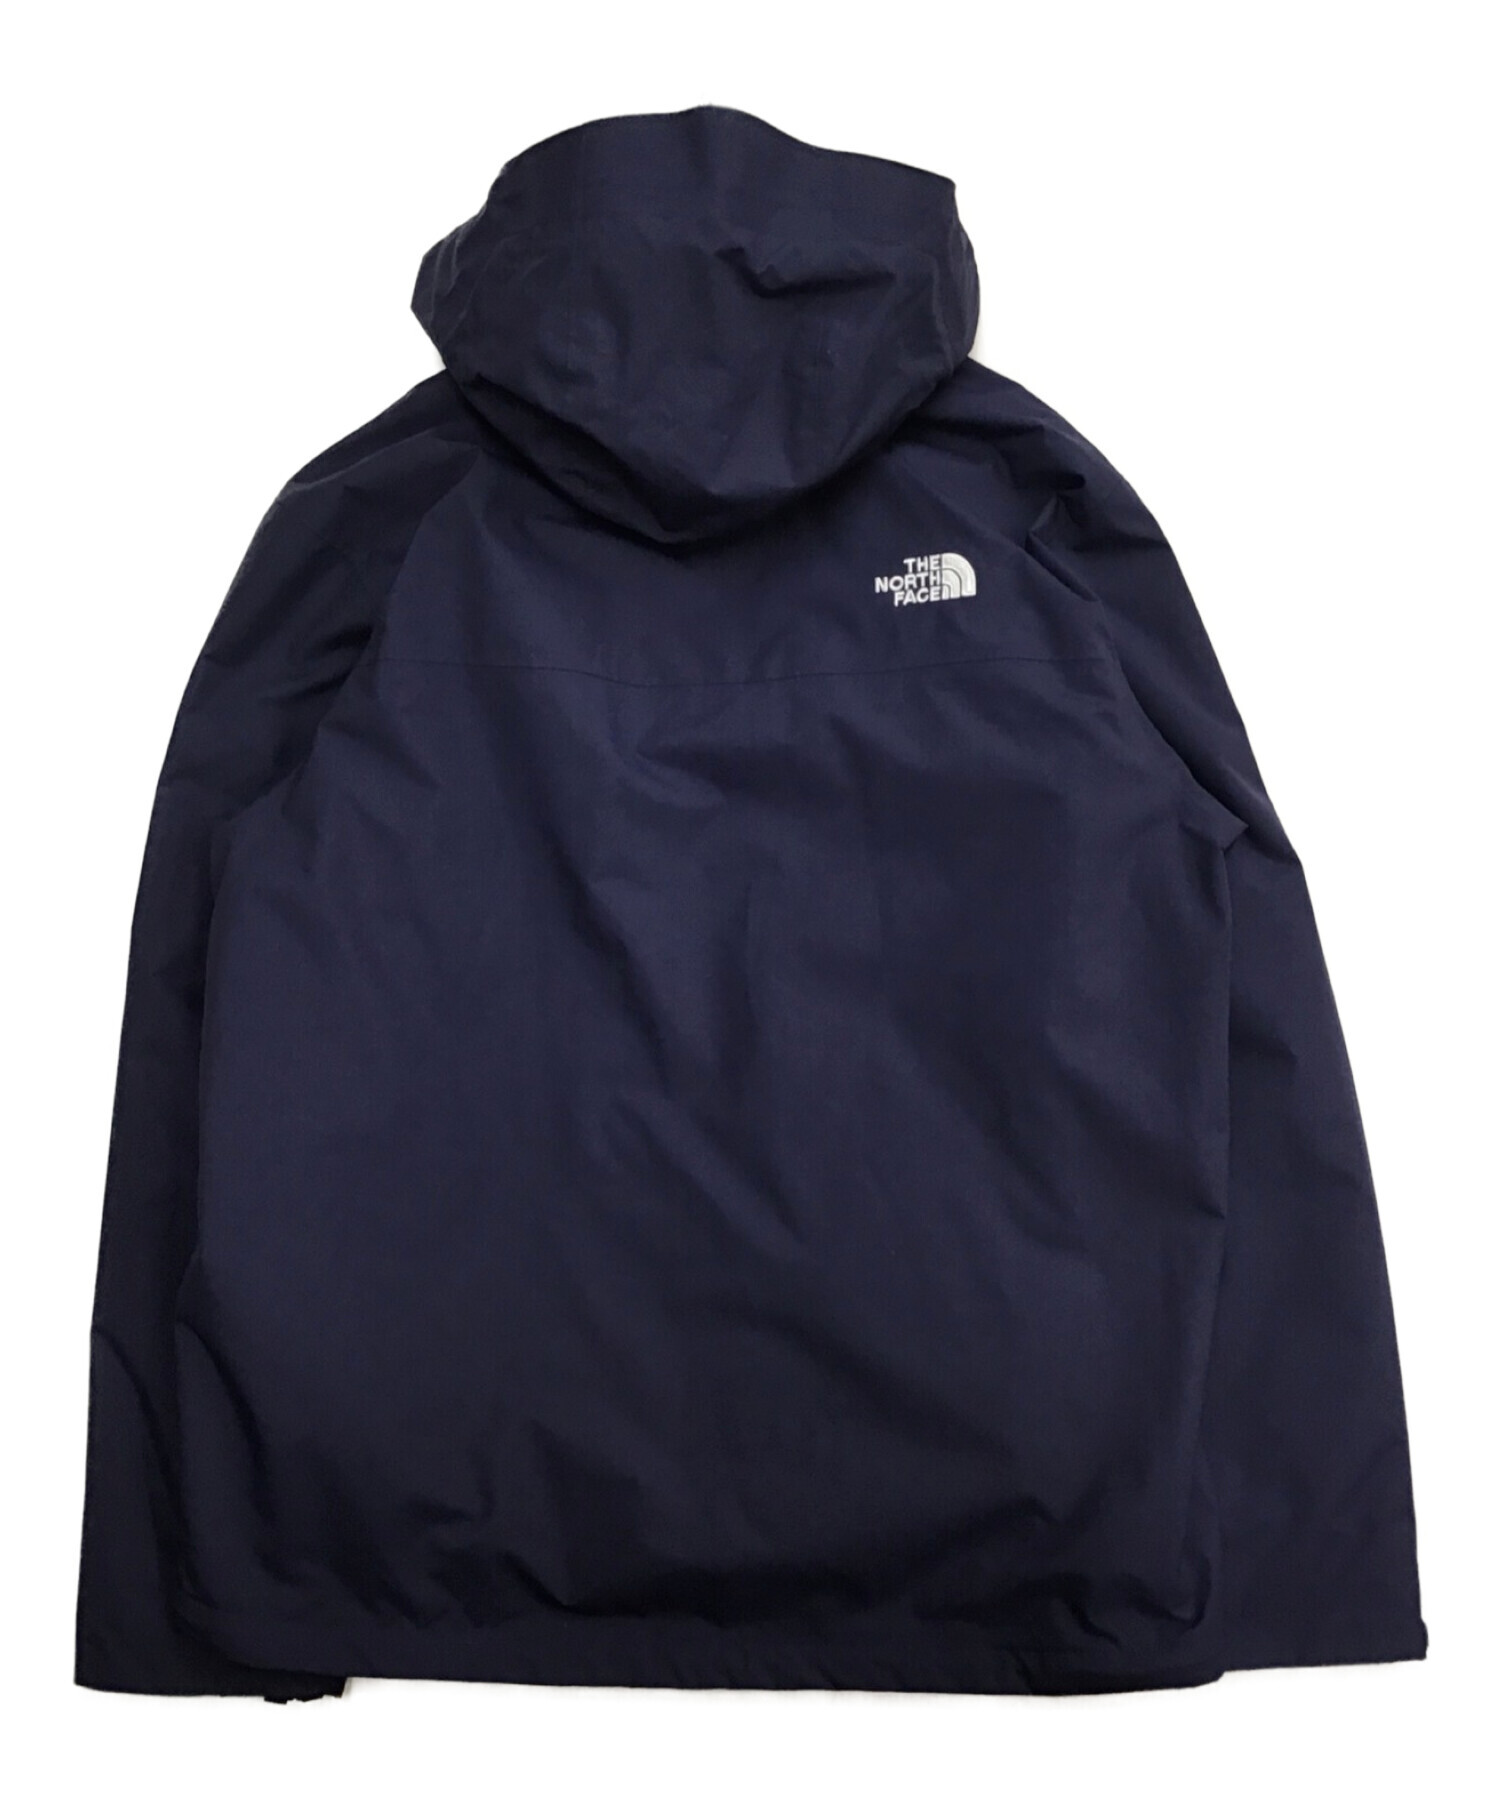 THE NORTH FACE ストームピークパーカー カーキ XXL 大きめ ...